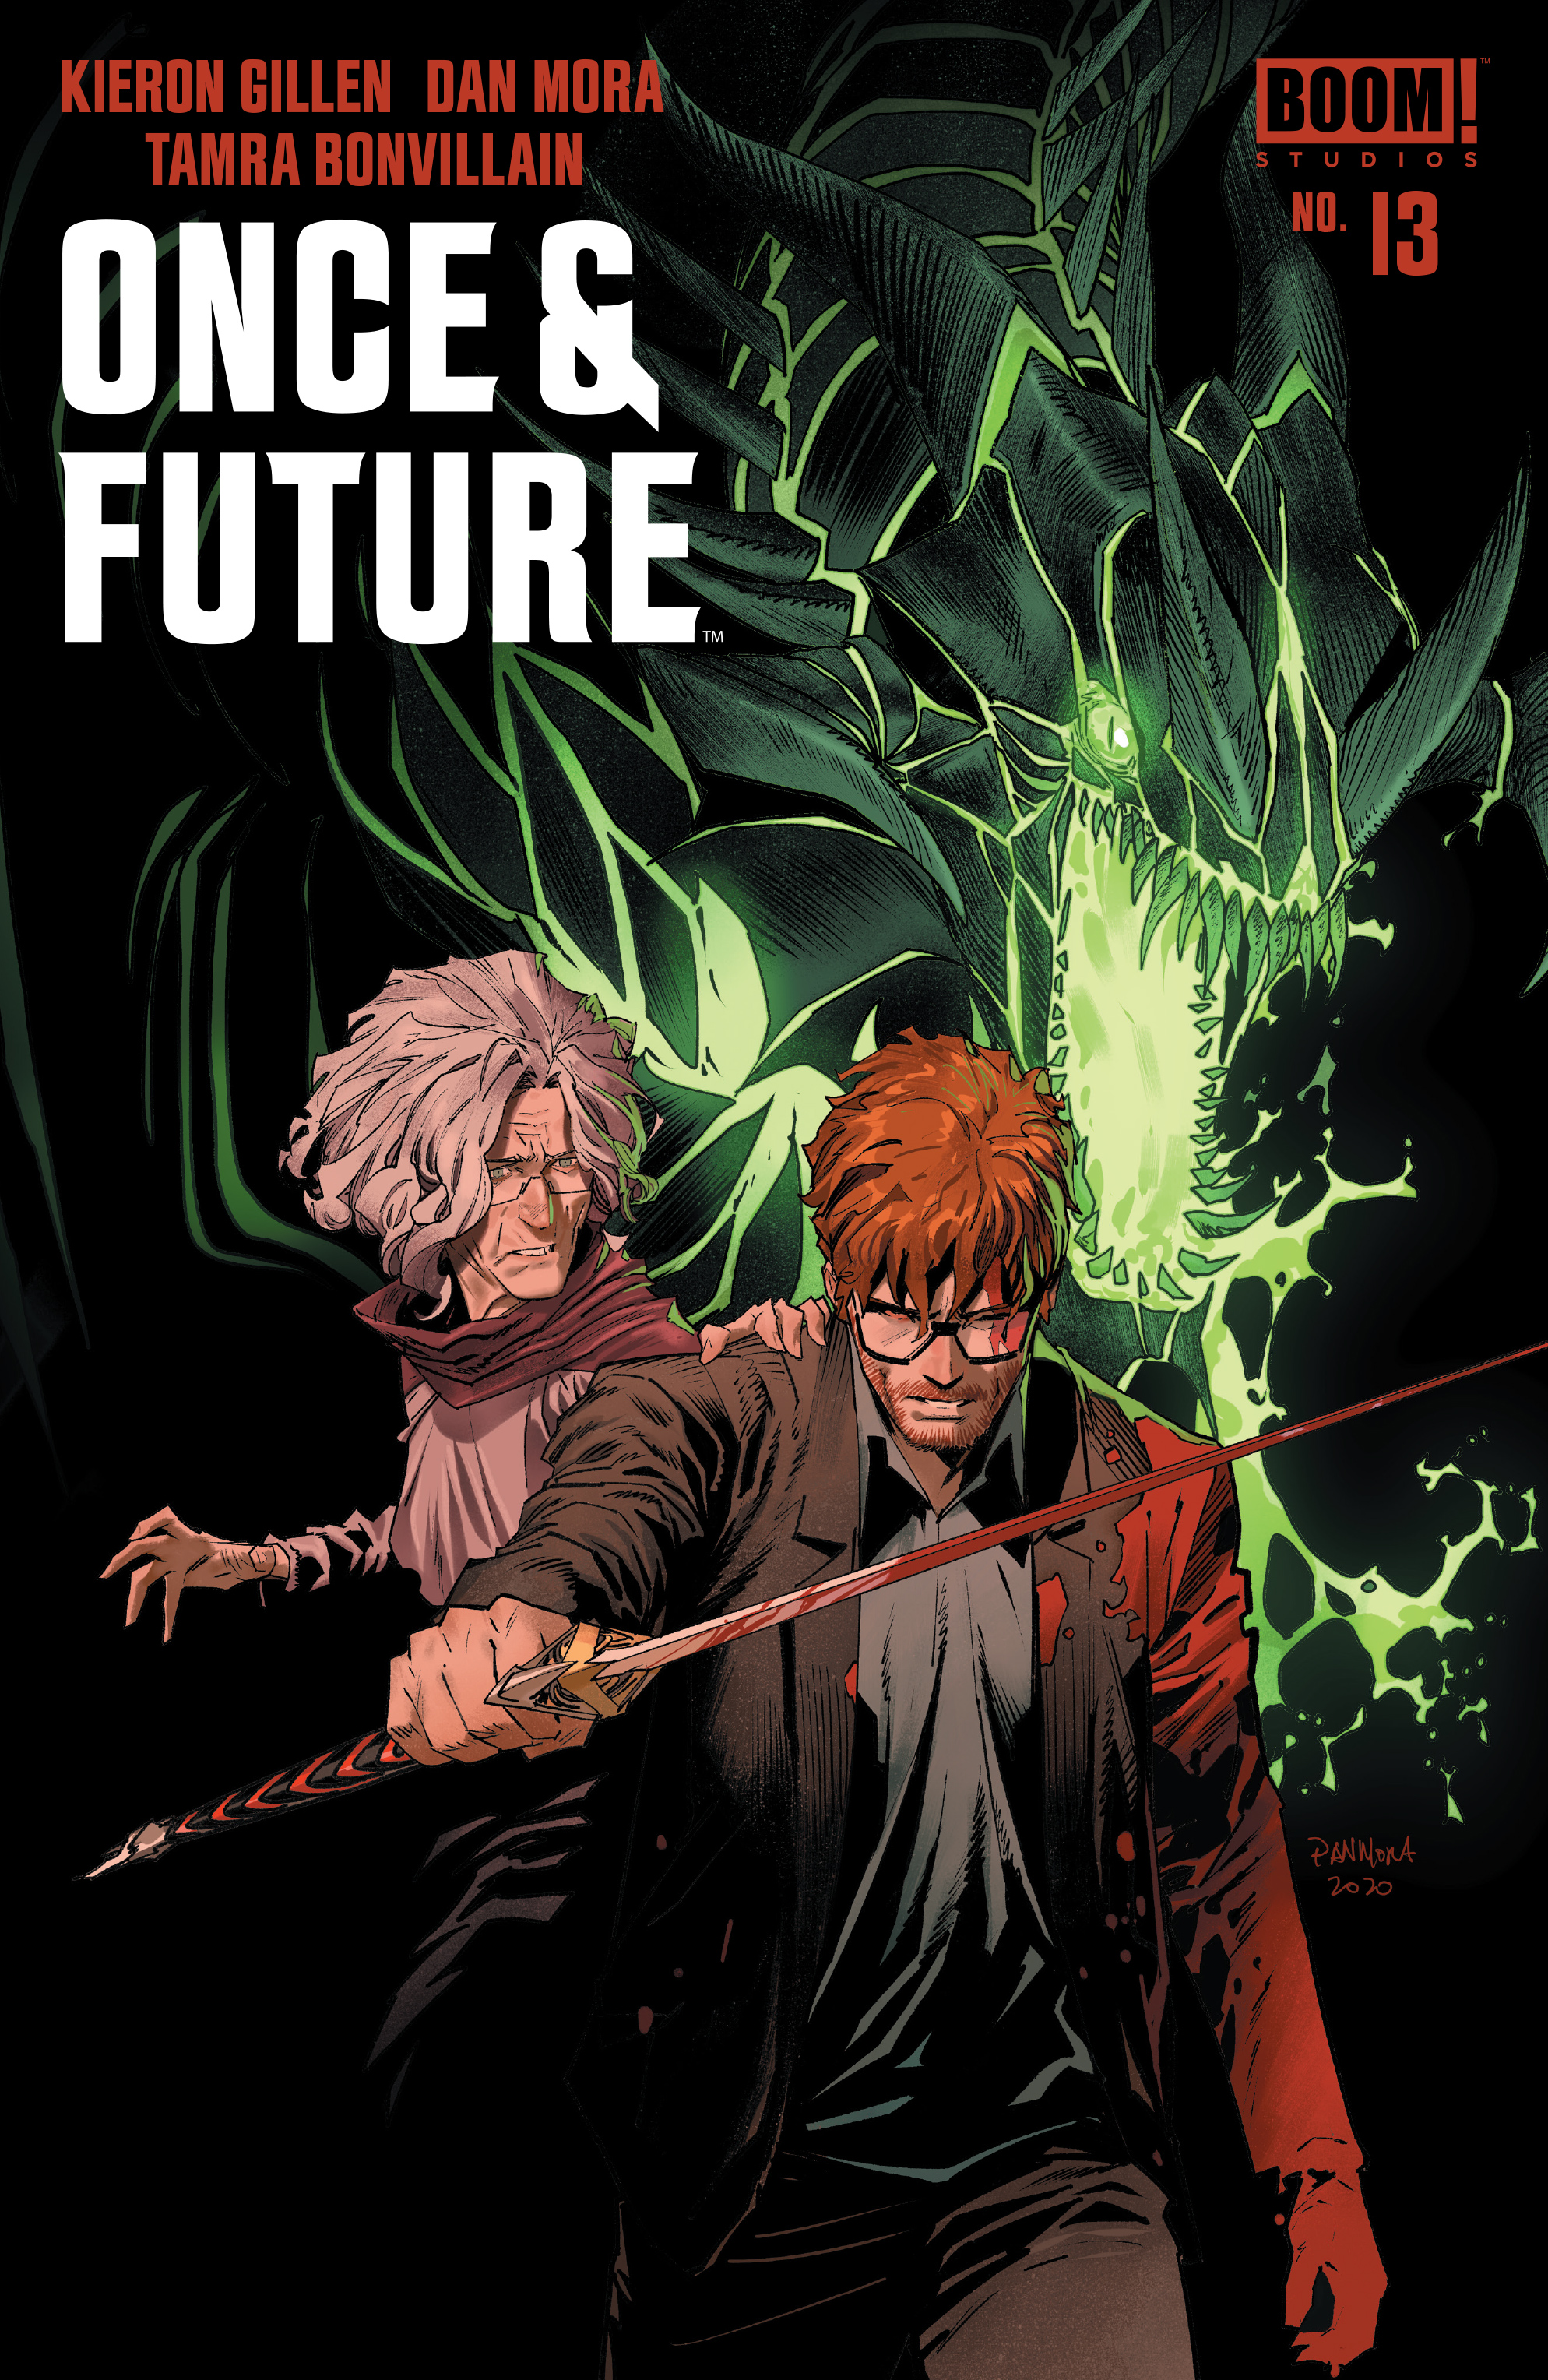 Read online Once & Future comic -  Issue #13 - 1